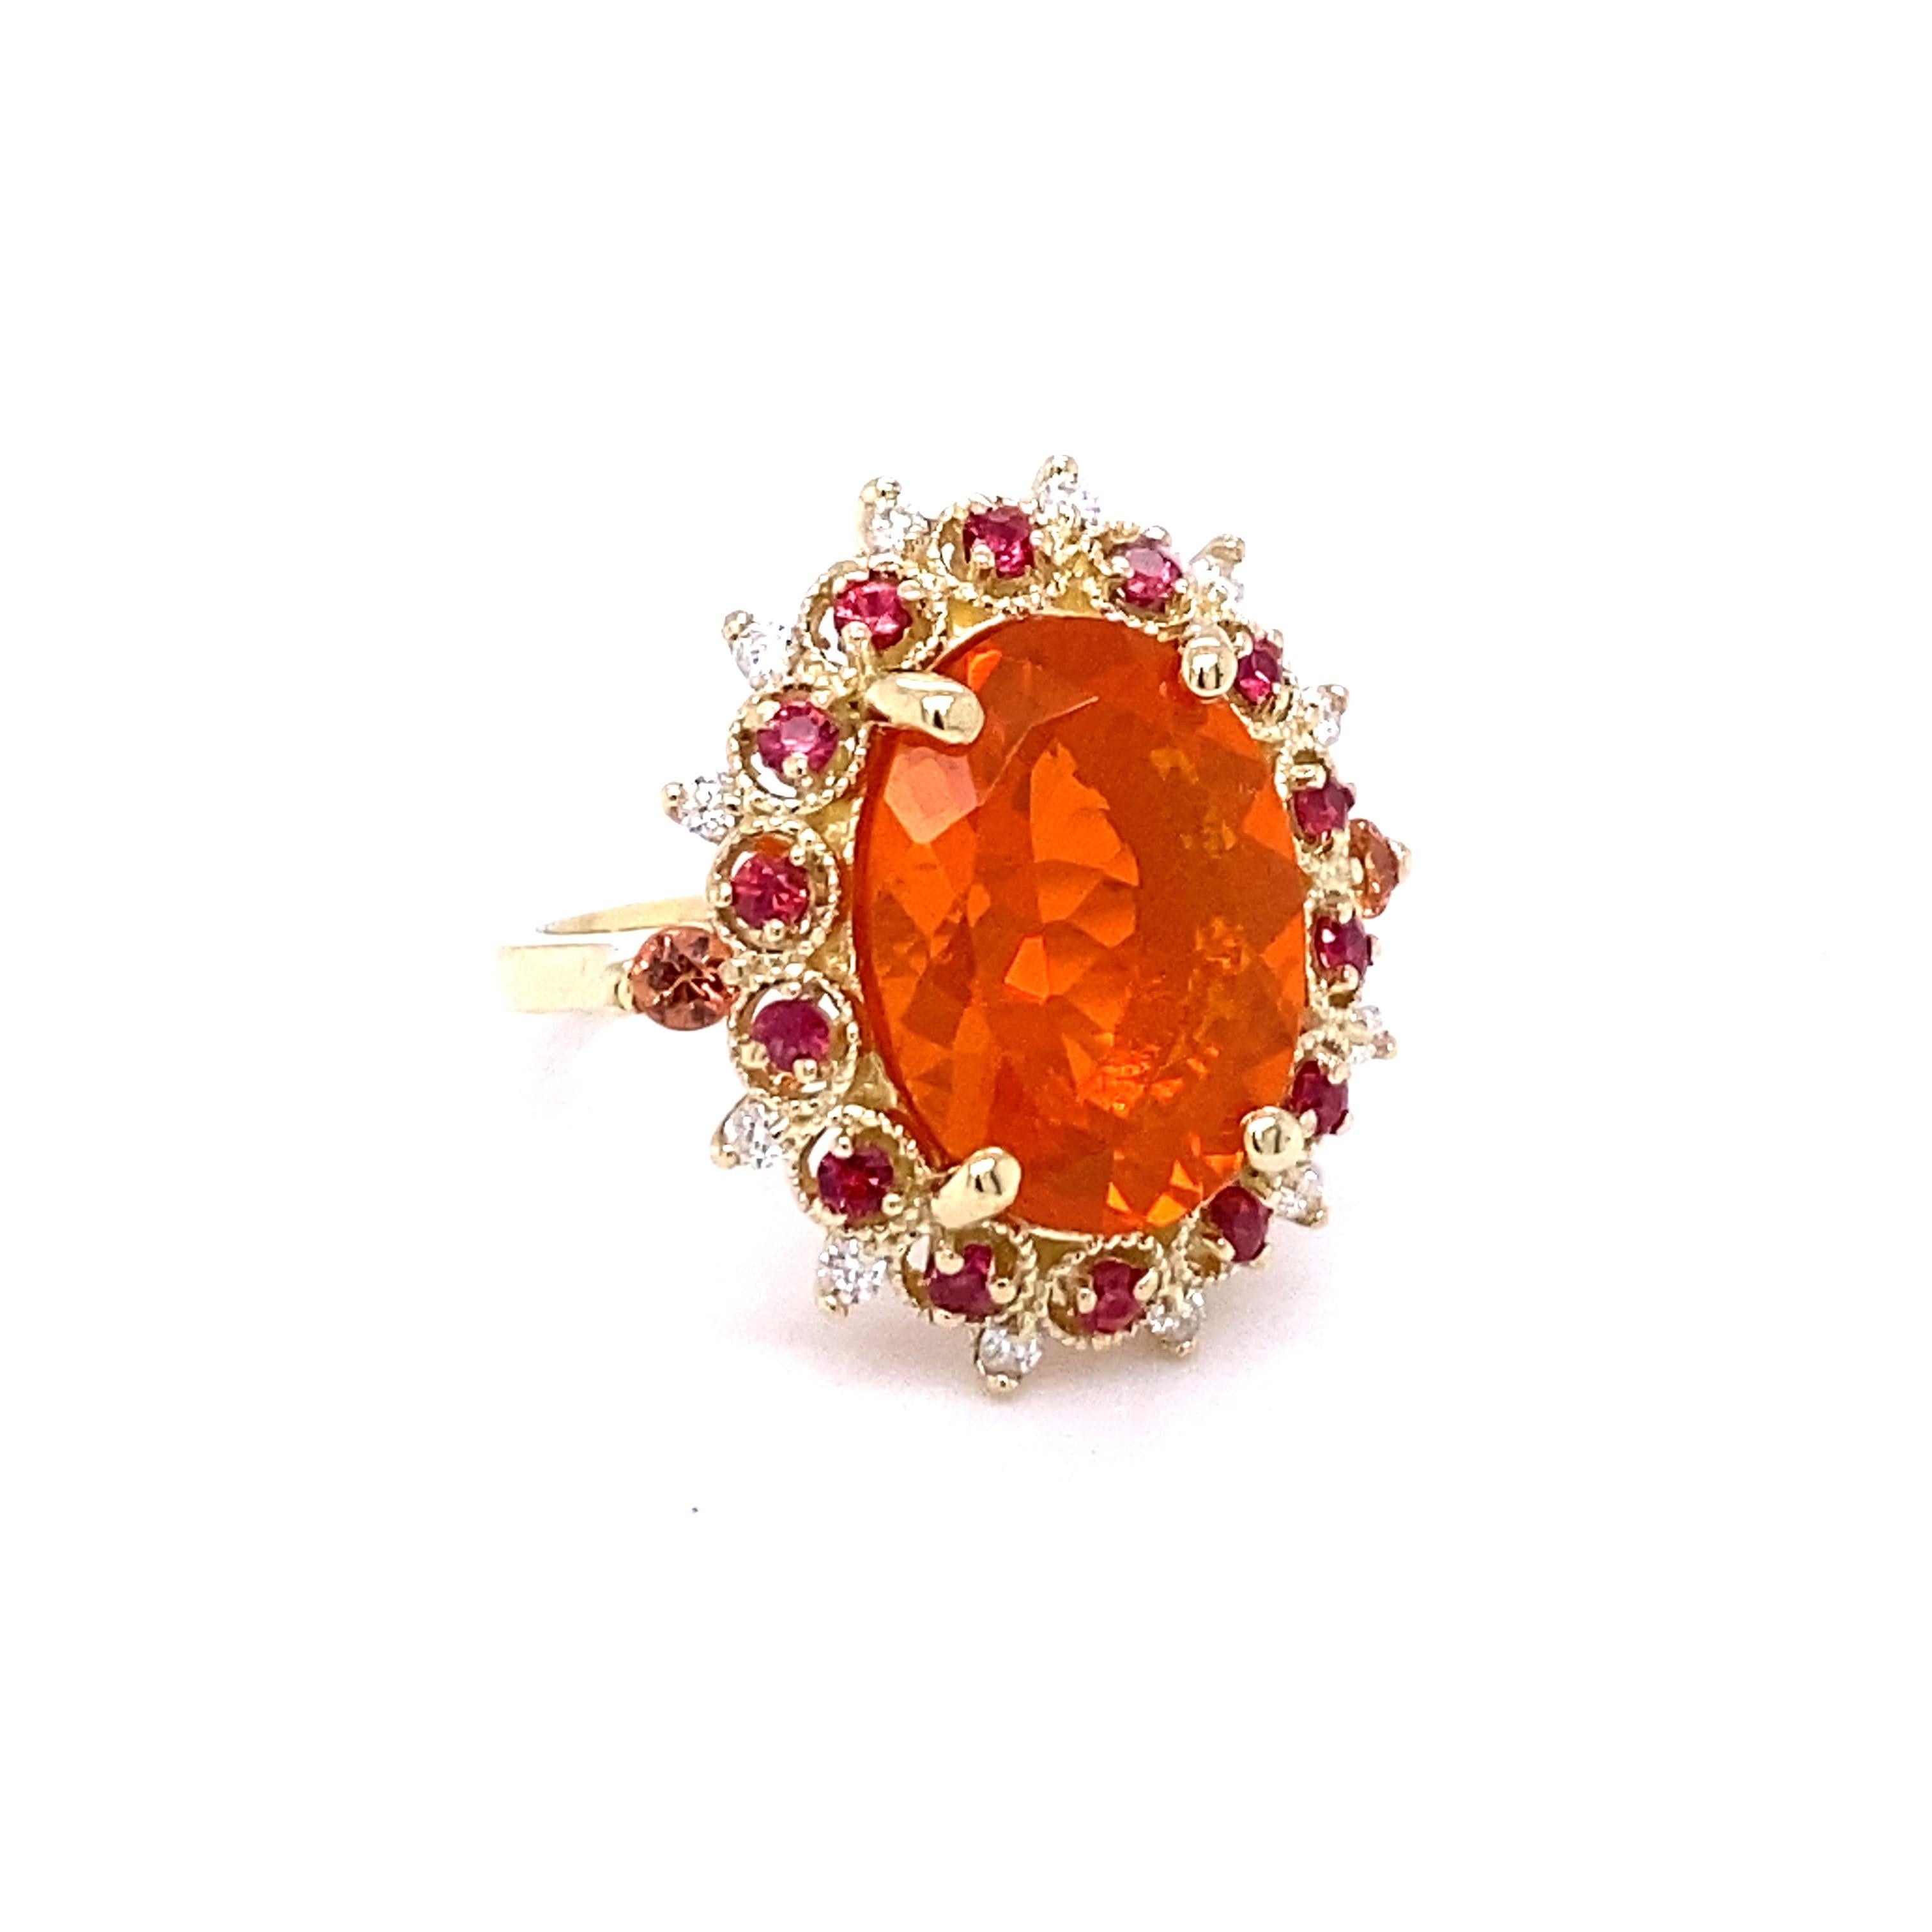 Contemporary 5.80 Carat Fire Opal Diamond 14K Yellow Gold Cluster Ring